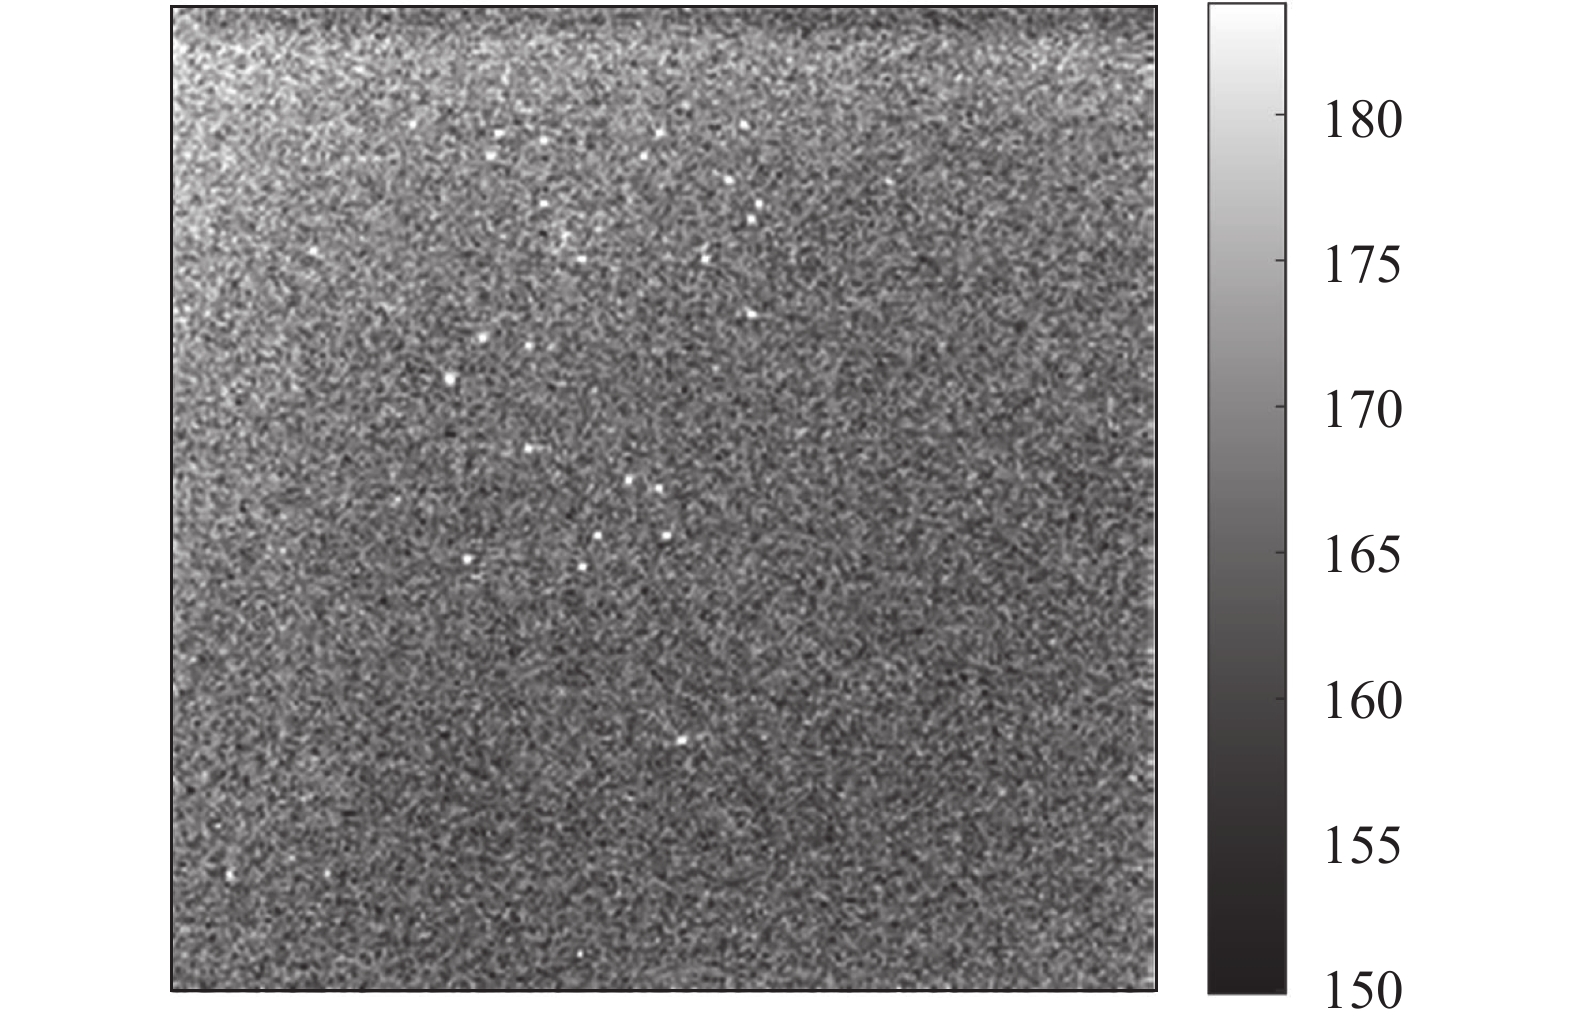 Gain grayscale map of HgCdTe APD focal plane at −8.6 V